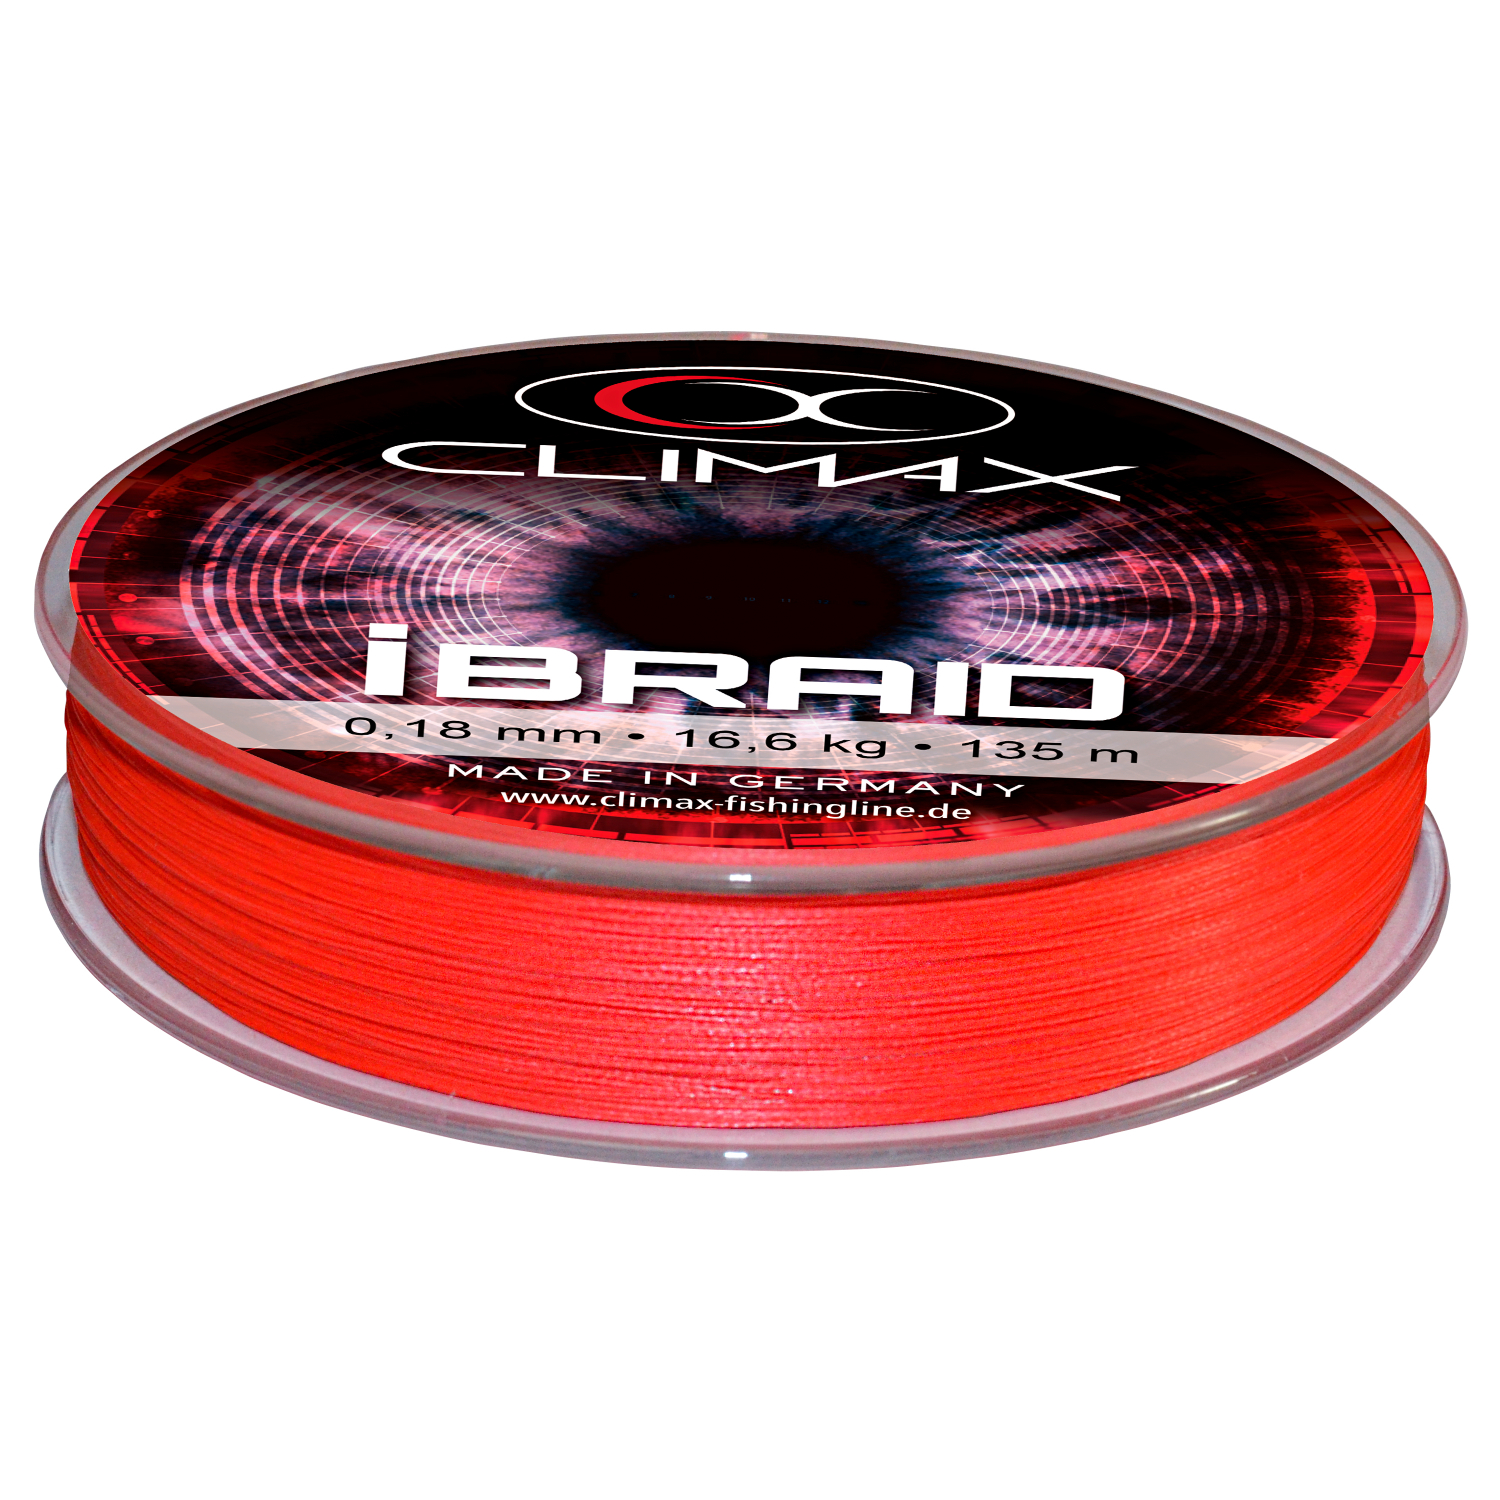 Climax Fishing Line iBraid (fluo red, 135 m) at low prices